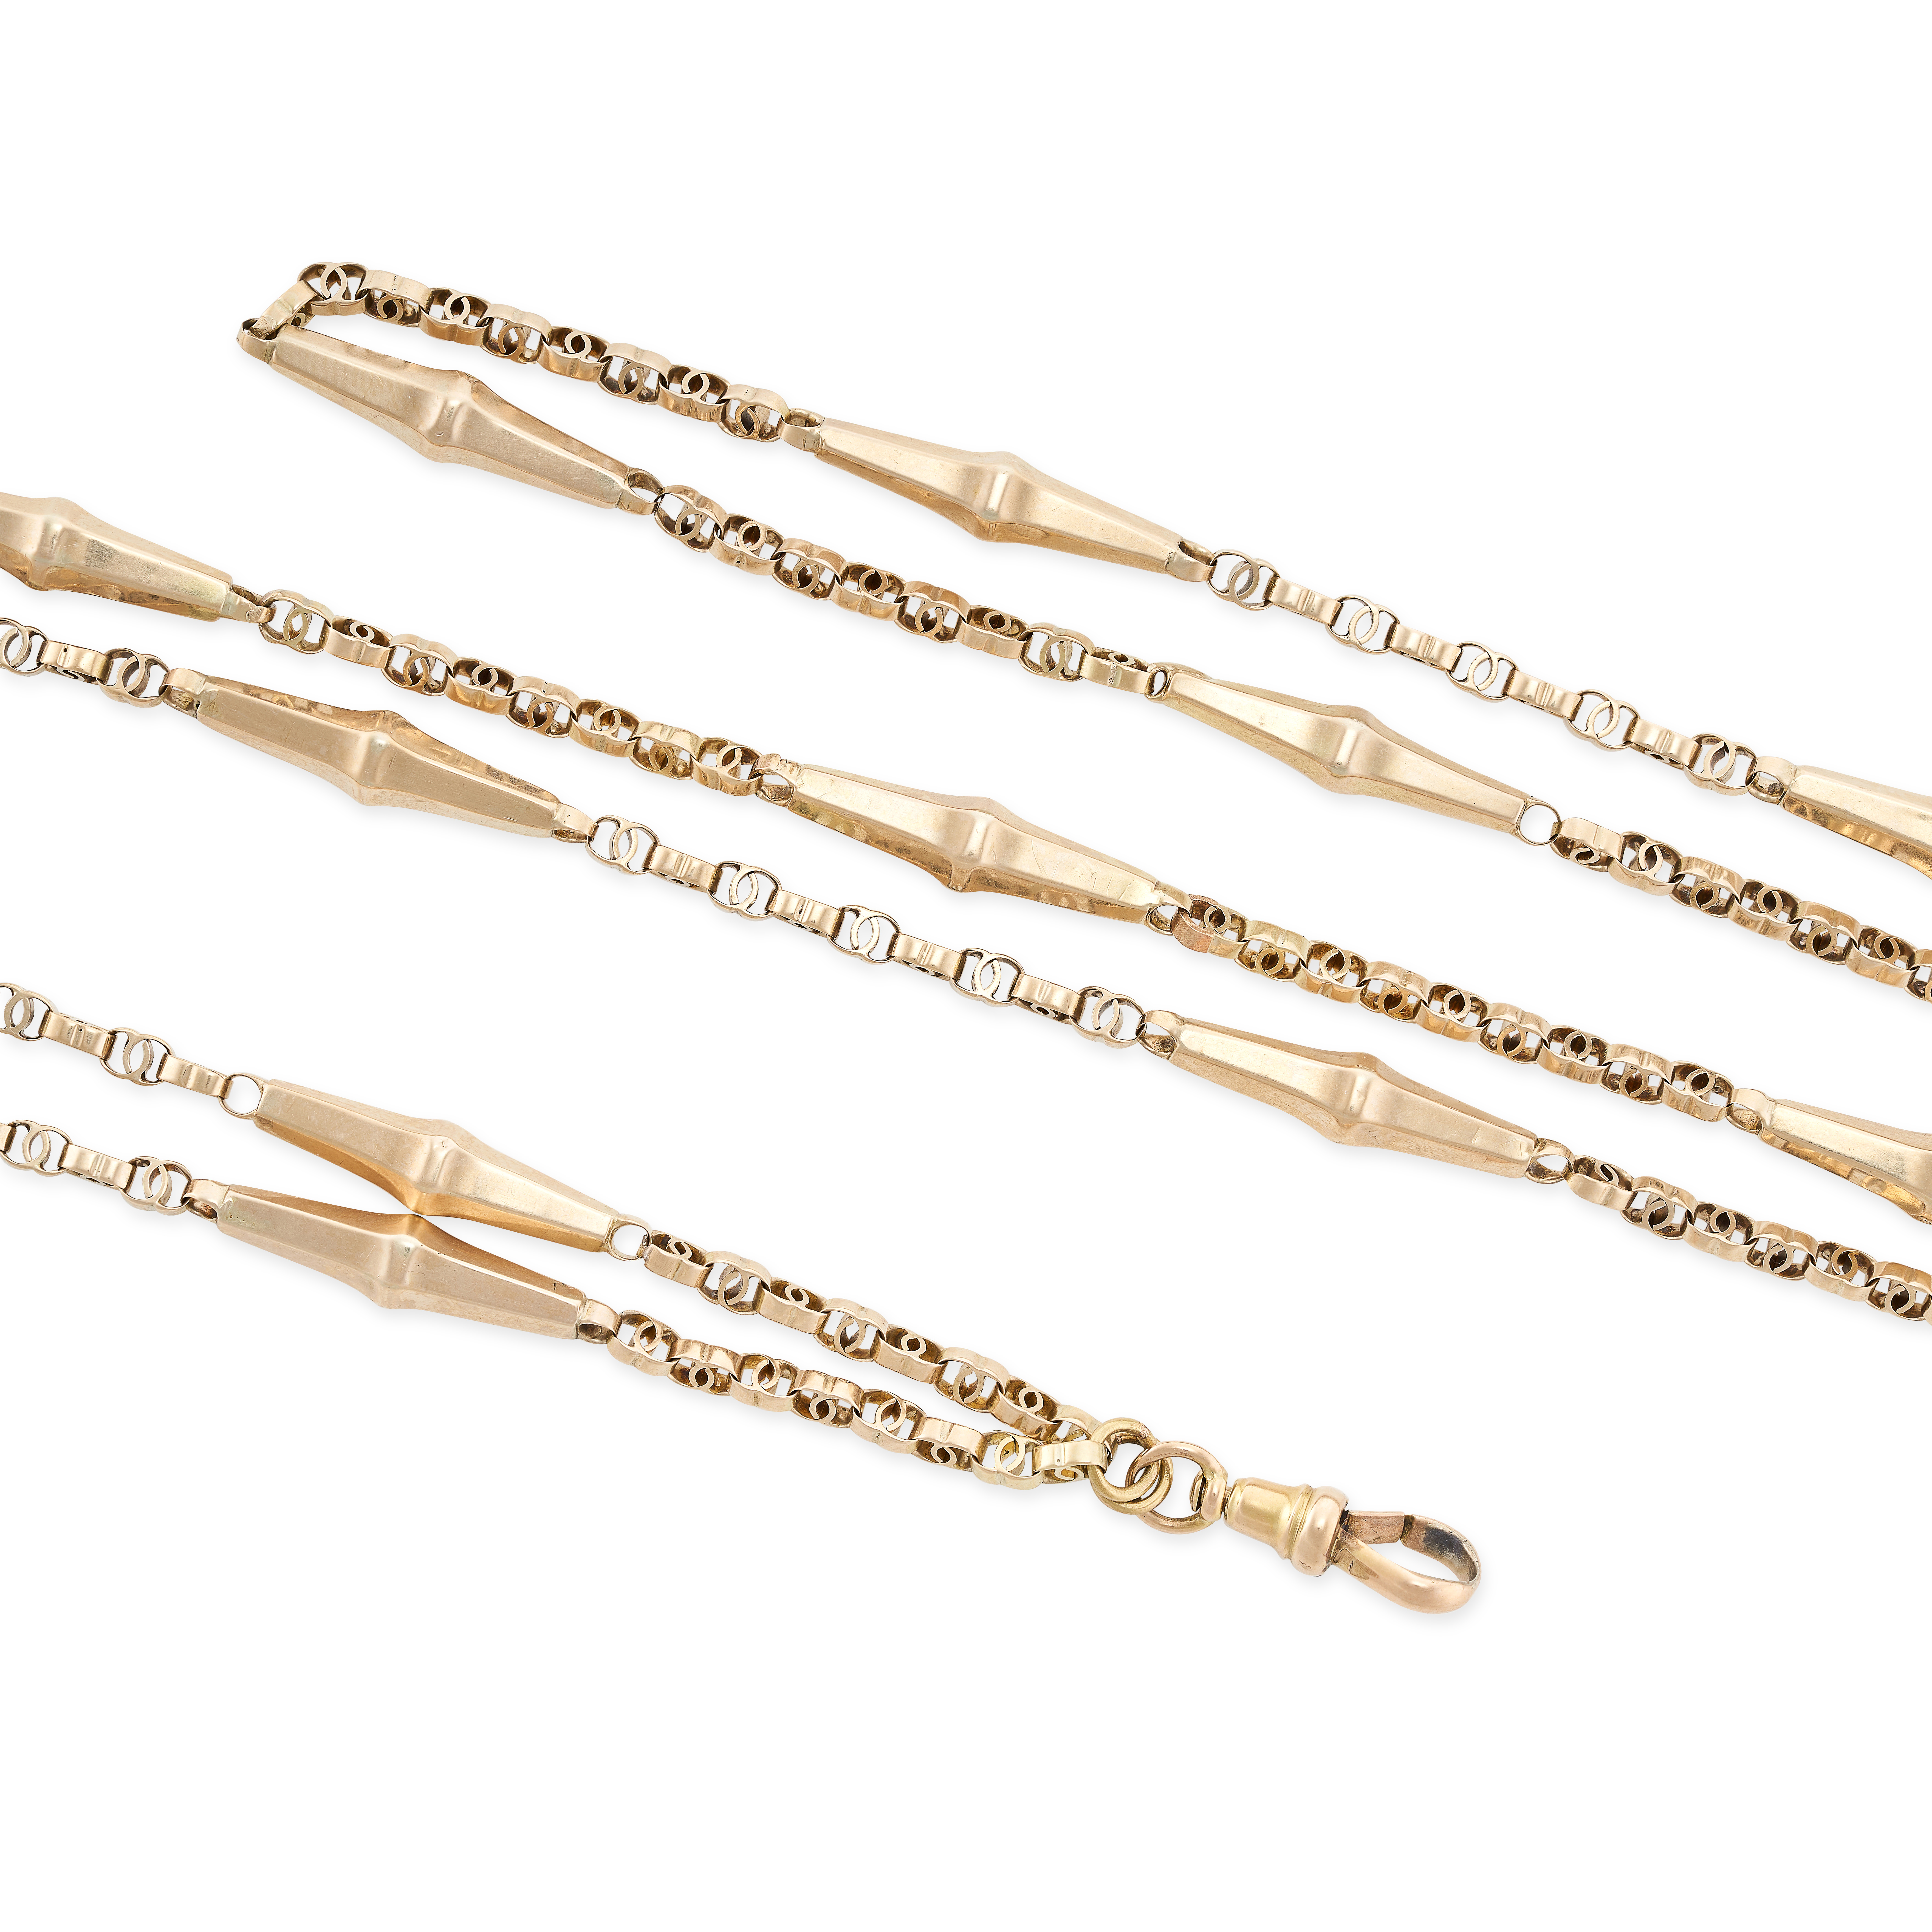 AN ANTIQUE FANCY LINK GUARD CHAON in yellow gold, comprising a series of fancy and elongated